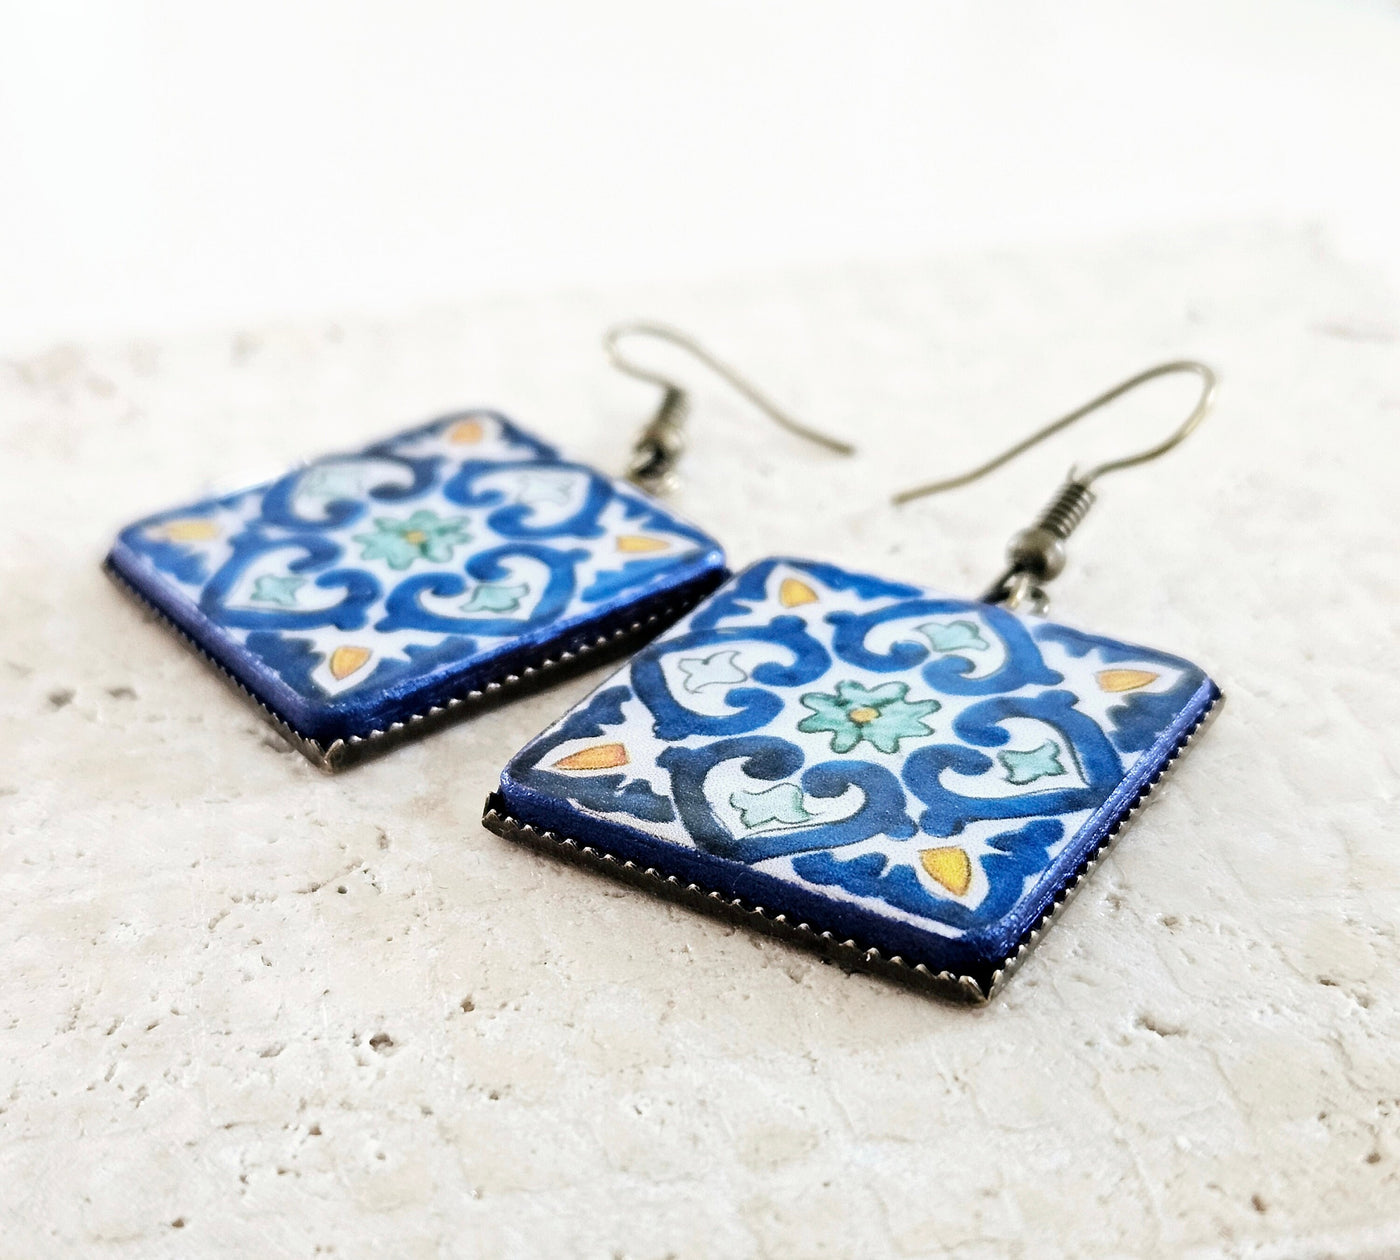 Blue Spanish Tile Earring Talavera Mexican Jewelry Handmade Mexico Gift Traditional Spanish Pottery Tile Jewelry Artisanal Bronze Earrings